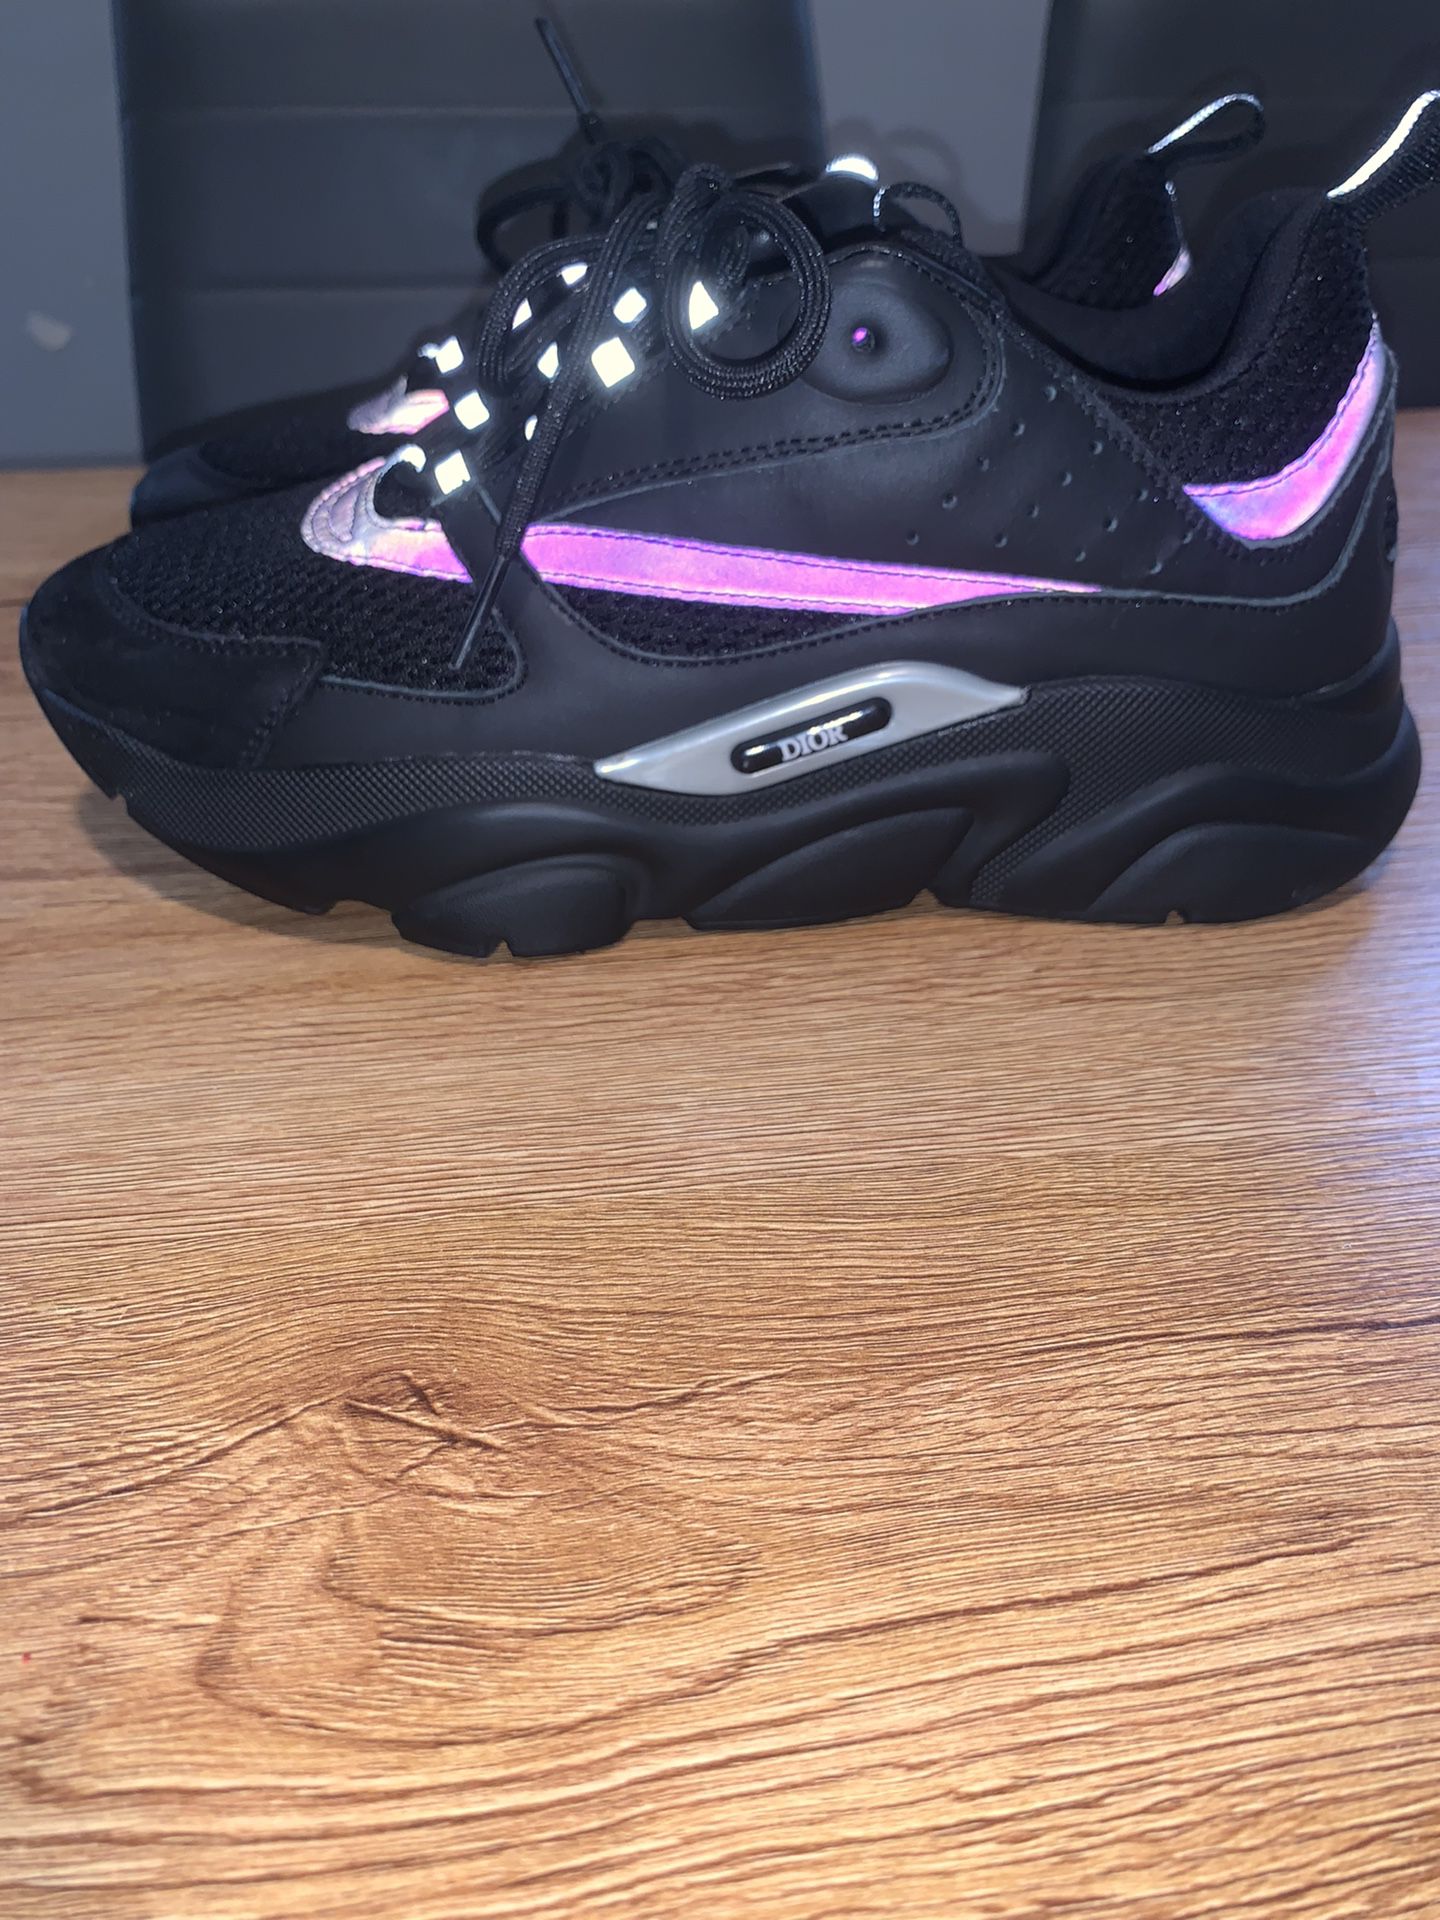 B22 Dior Sneakers Black Technical Mesh and Smooth Calfskin for Sale in  Chicago, IL - OfferUp